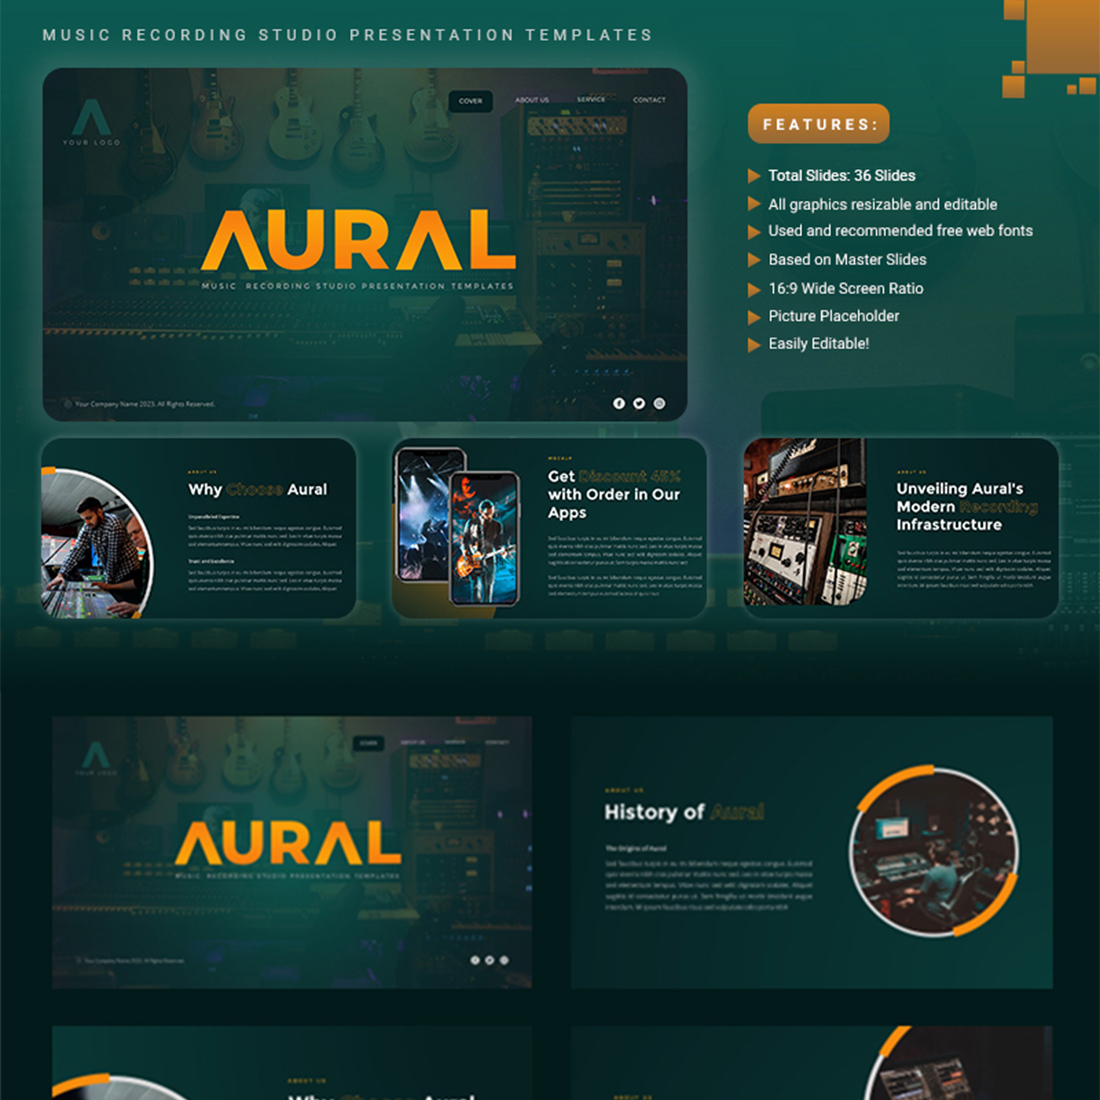 Aural - Music Recording Studio PowerPoint Template preview image.